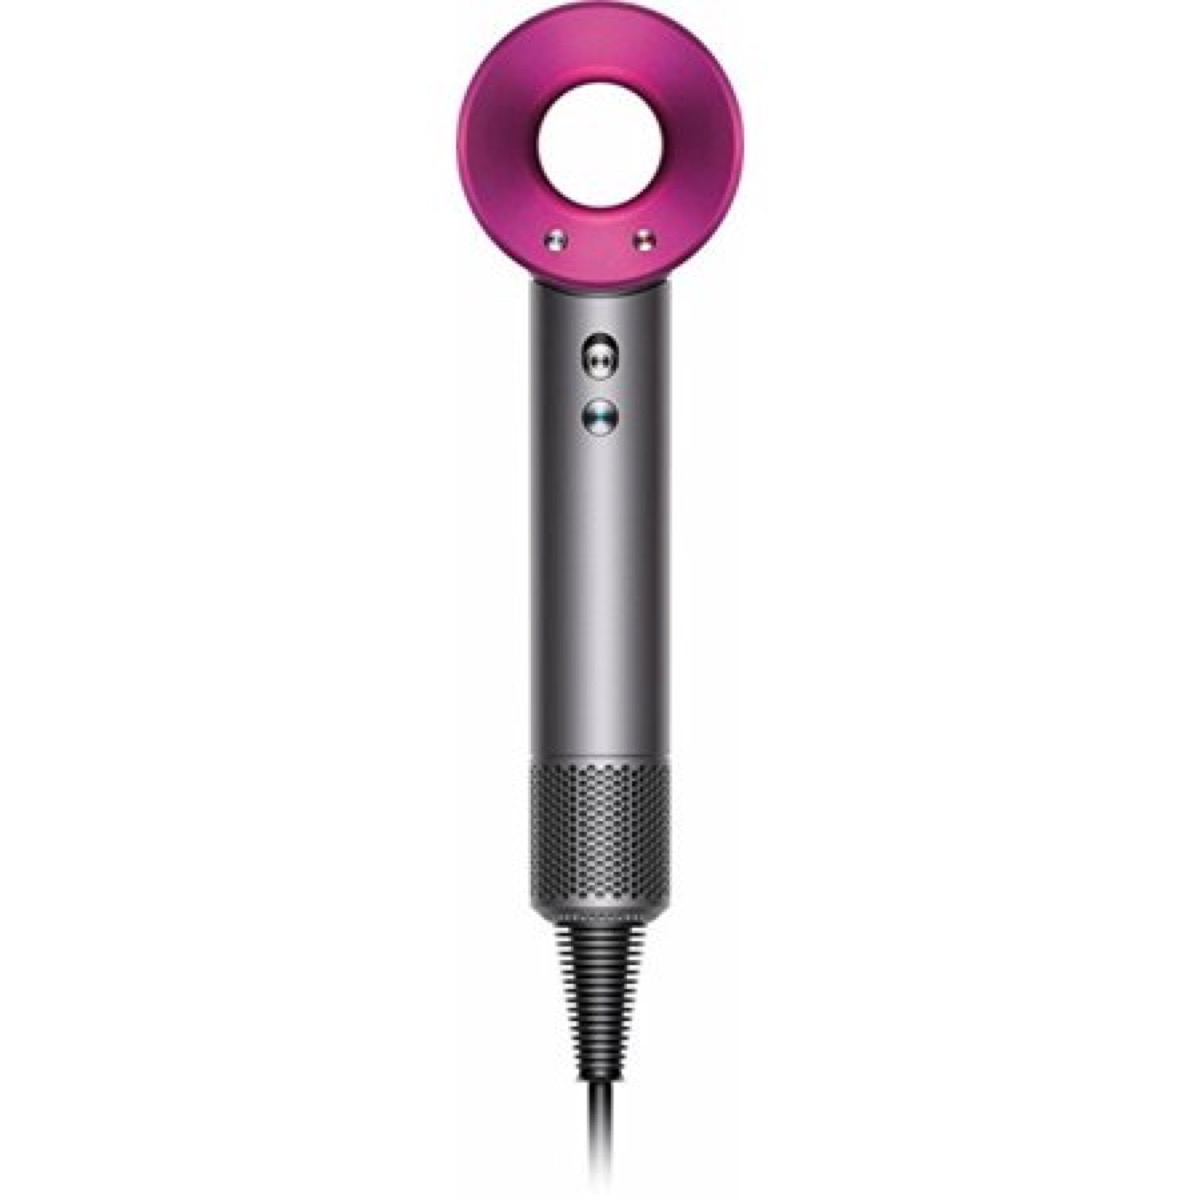 silver dyson hair dryer with pink interior